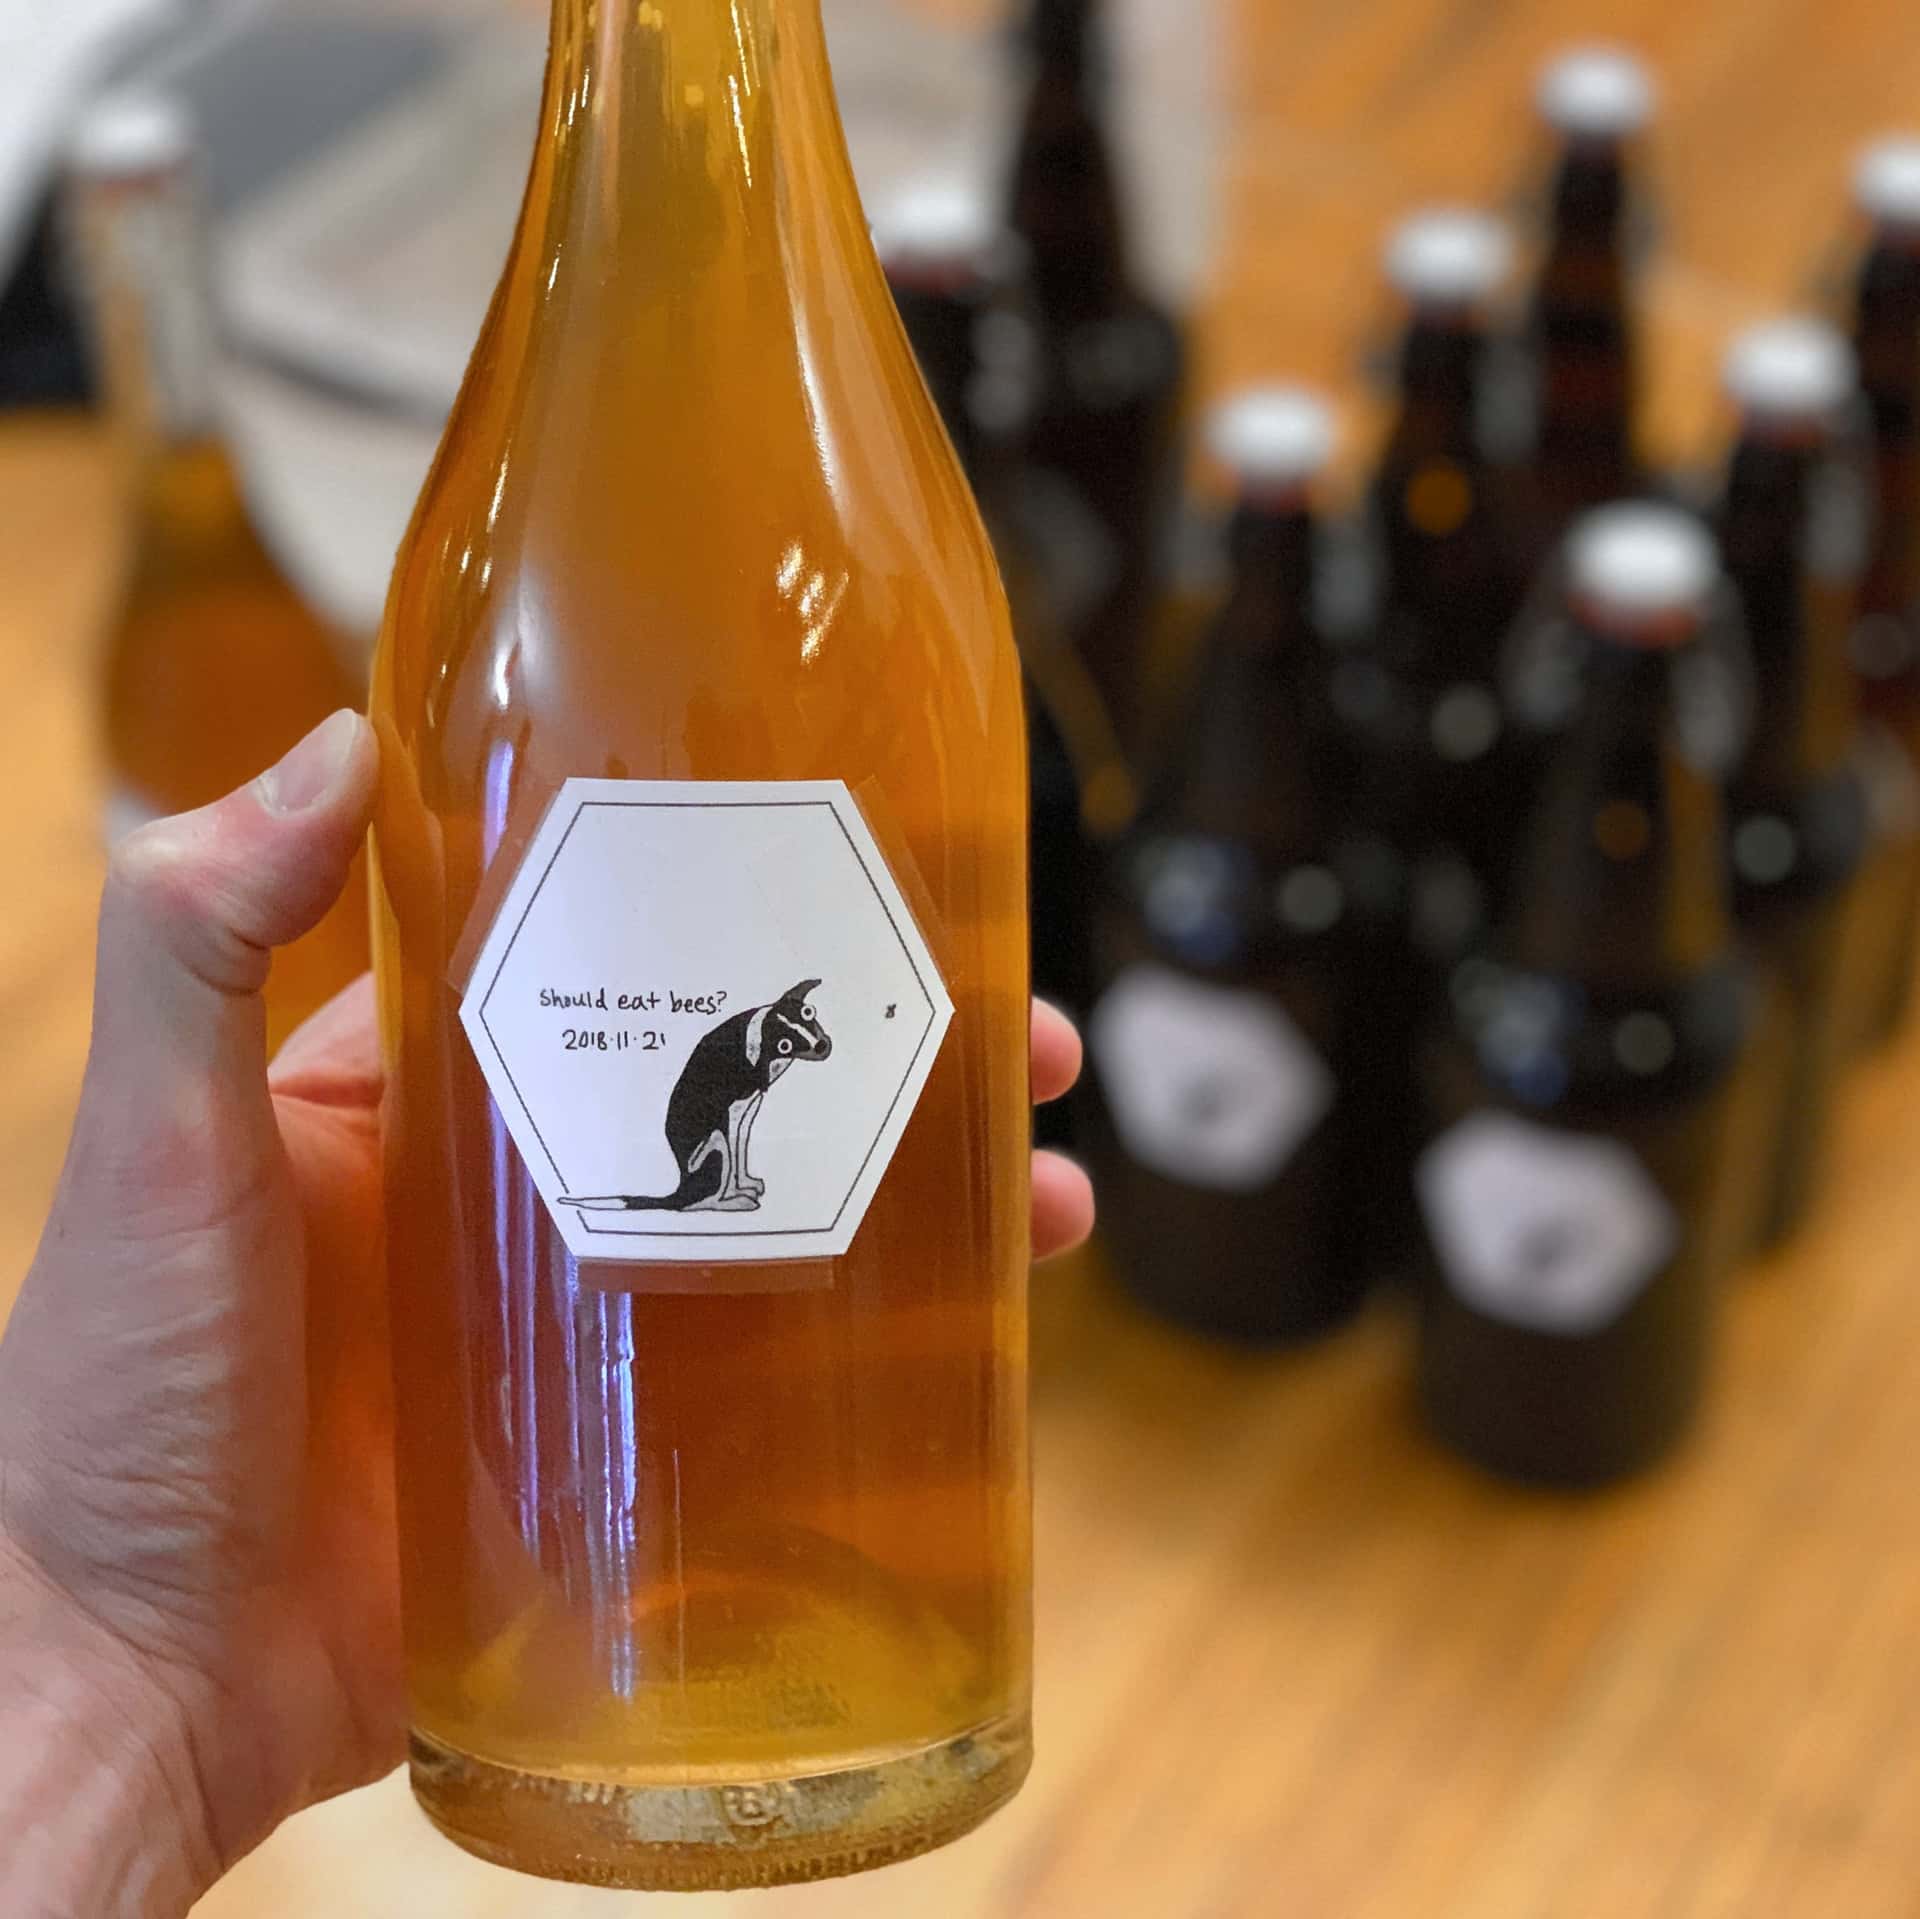 homebrew IPA labeled with “Should eat bees?” and Allie Brosh’s simple-minded dog